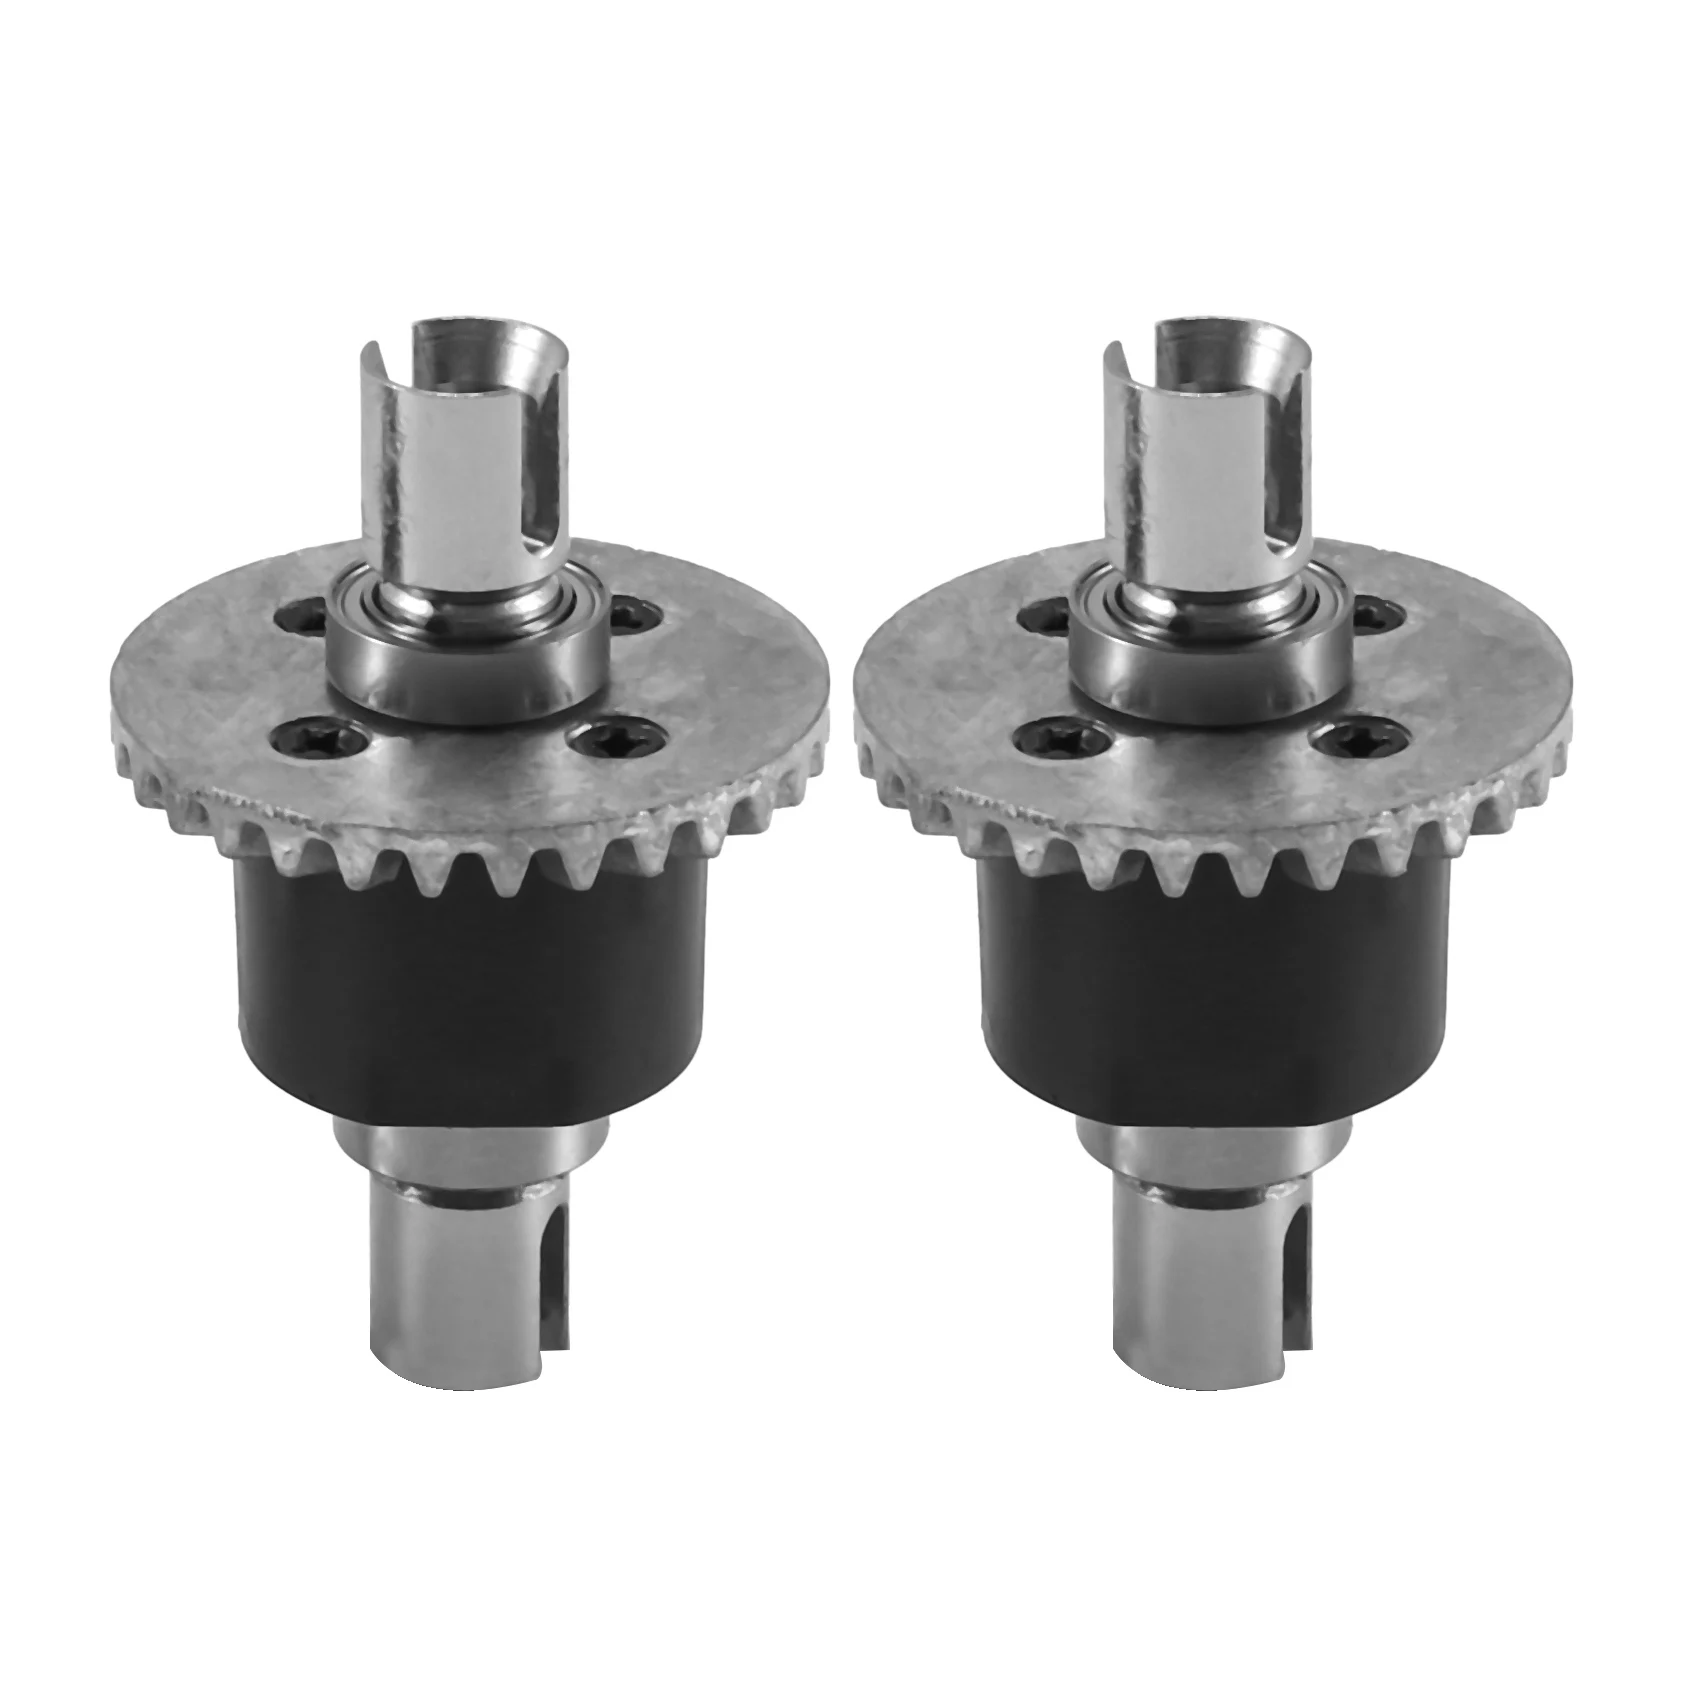 

2Pcs Metal Differential Gear 144001-1309 for WLtoys 144001 1/14 4WD RC Car Spare Part